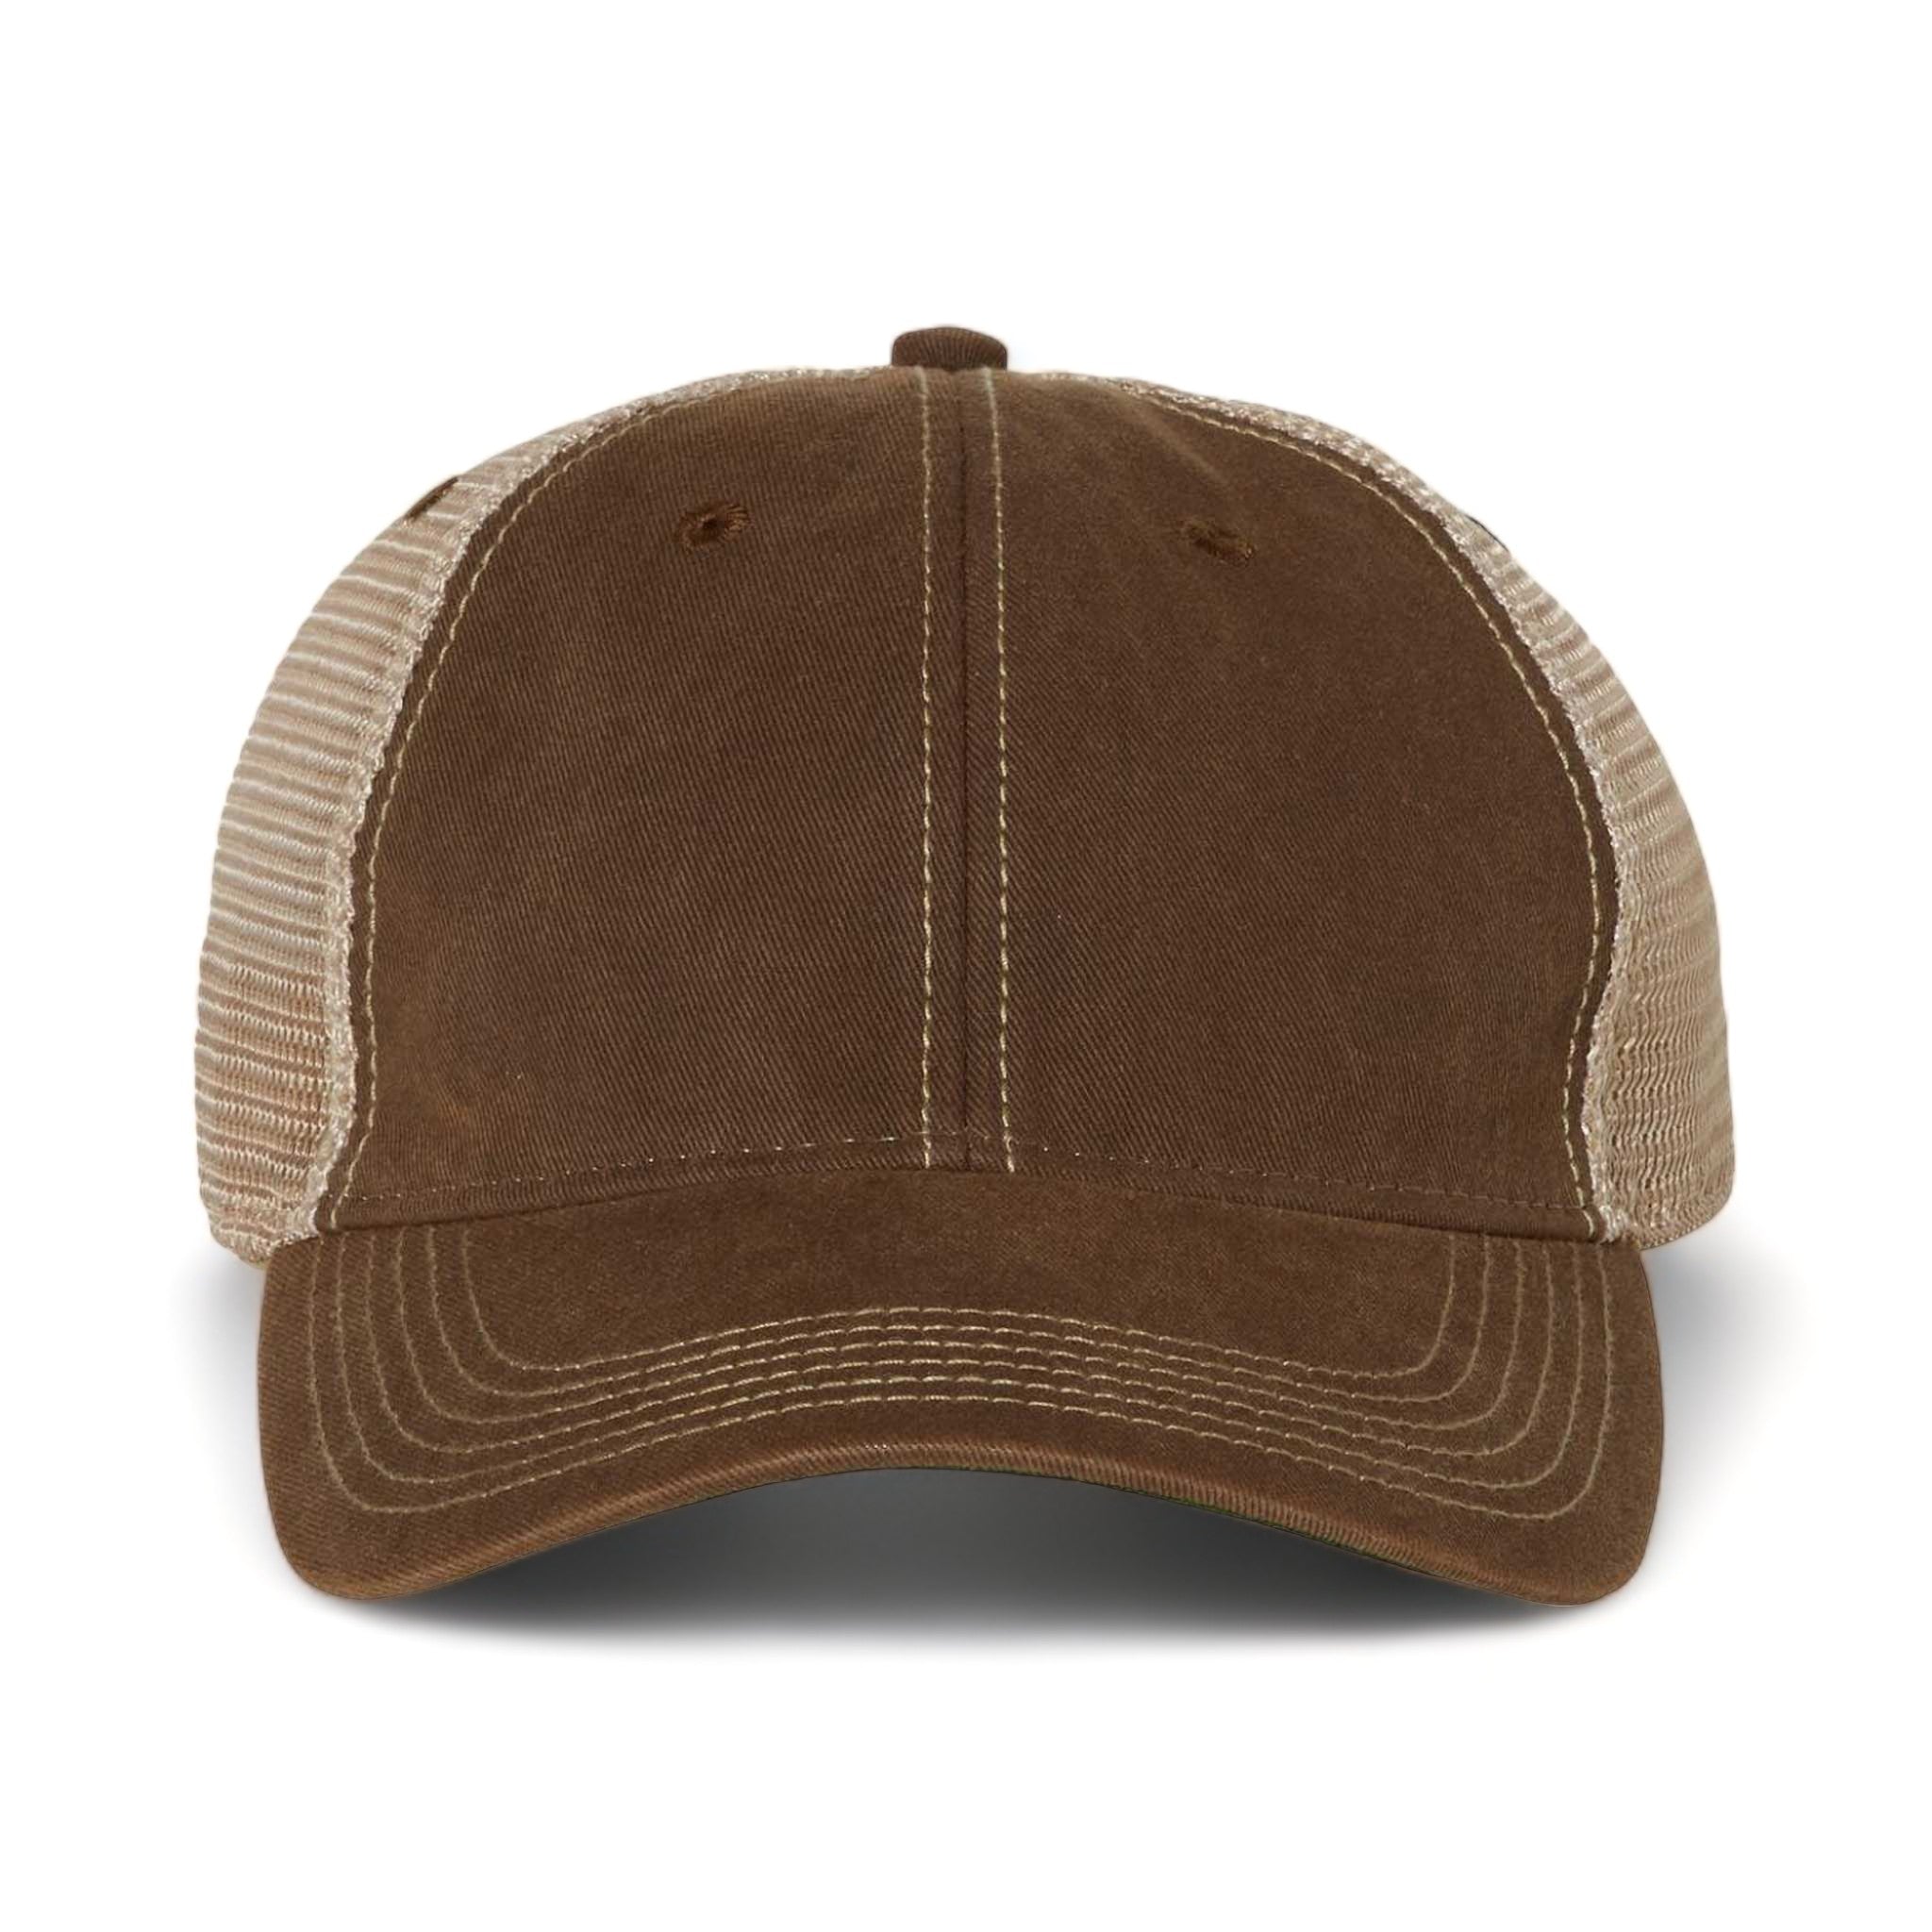 Front view of LEGACY OFA custom hat in brown and khaki